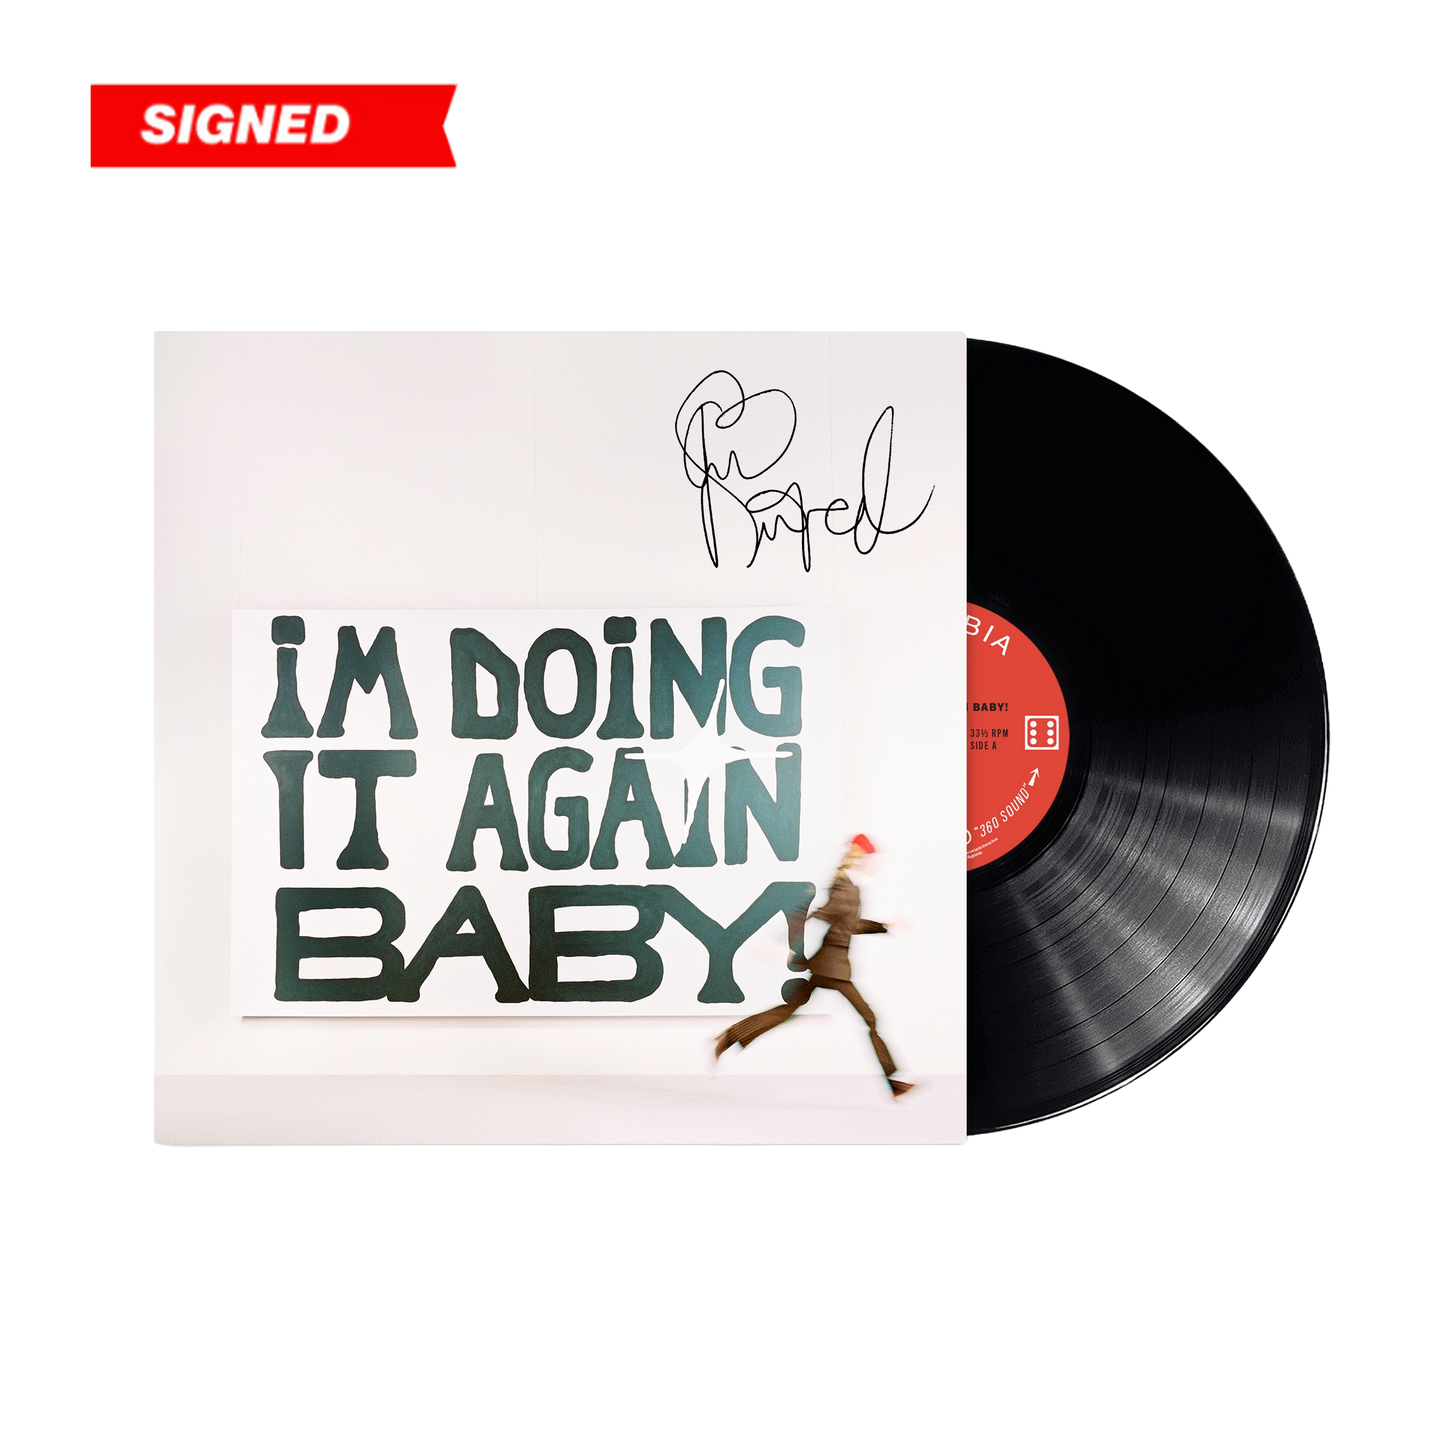 I'M DOING IT AGAIN BABY! LIMITED EDITION D2C EXCLUSIVE AUTOGRAPHED VINYL